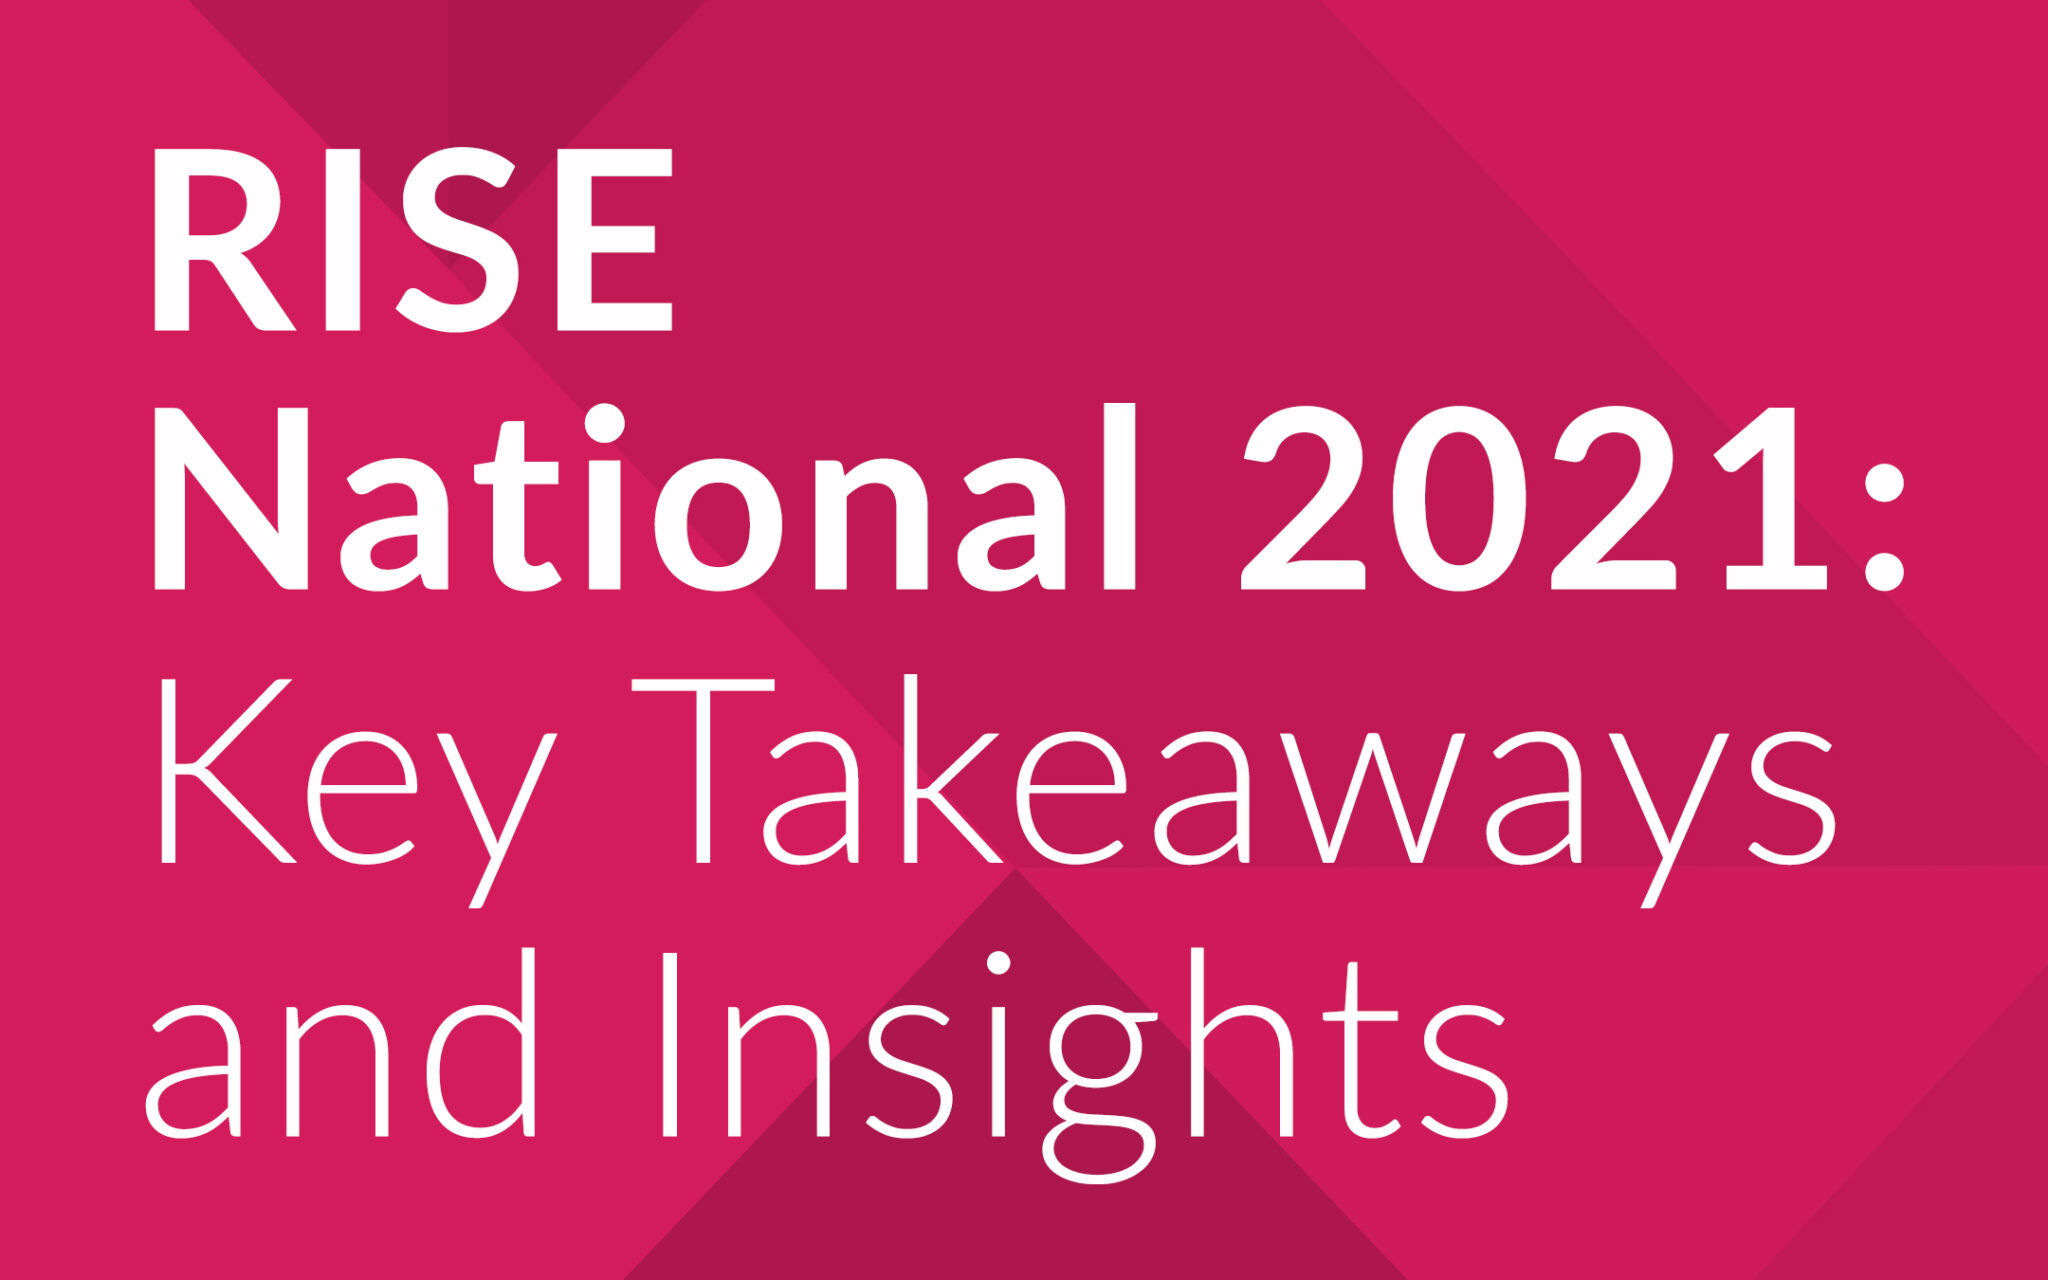 RISE National Health Experts Share Key Takeaways, Insights